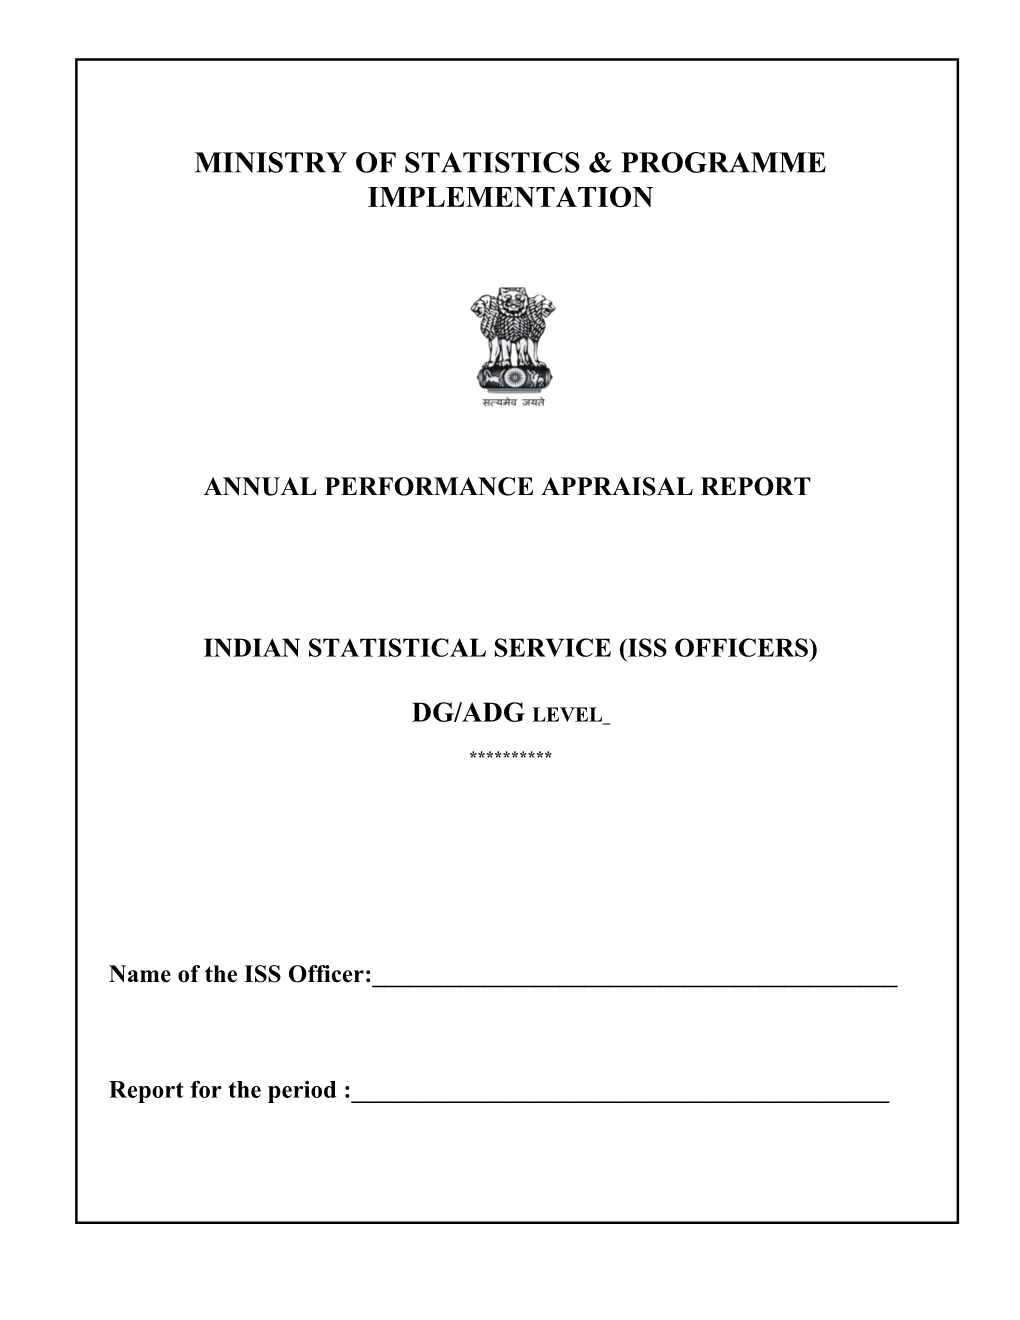 Ministry of Statistics & Programme Implementation